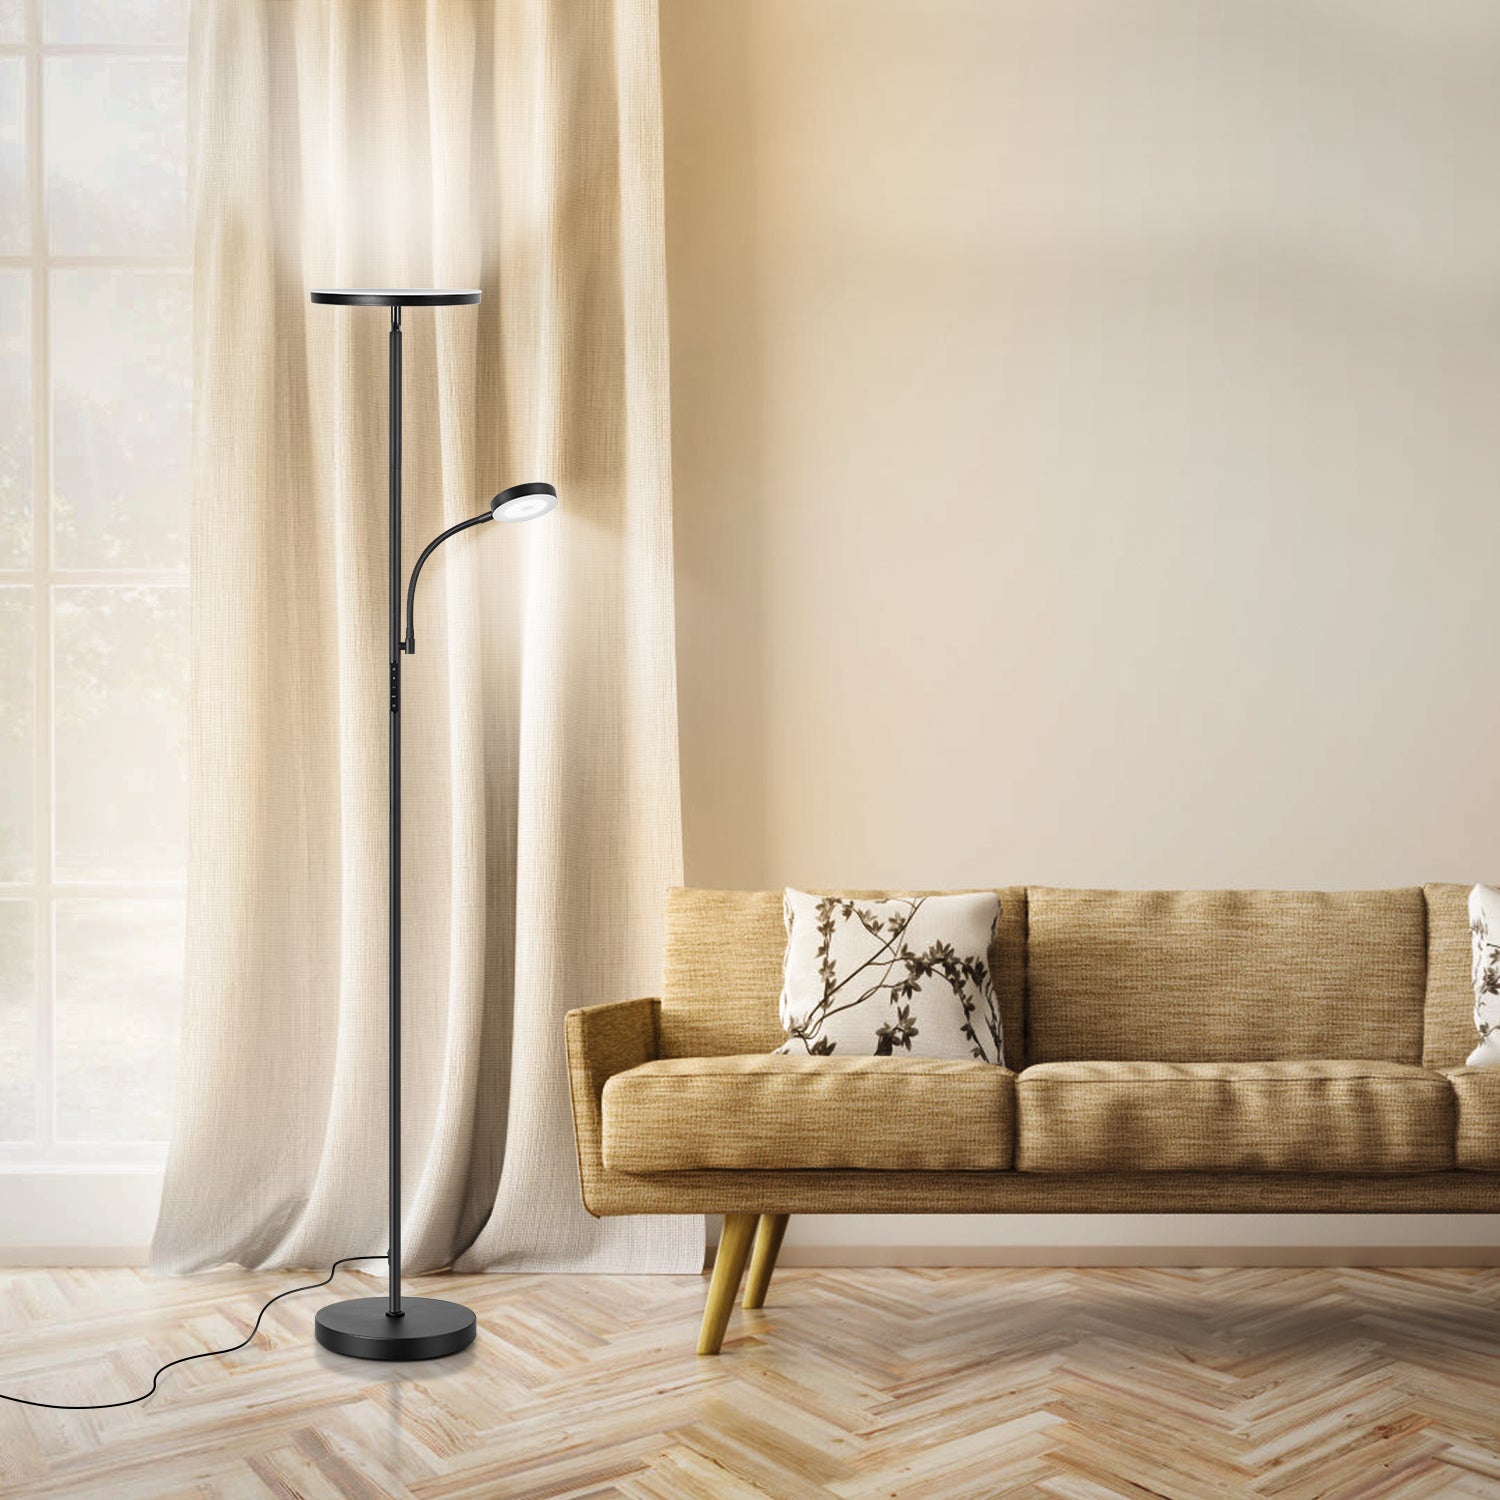 Outon LED Torchiere Floor Lamp with Reading Side Light, 4 Color Temperature Black Metal Standing Light for Living Room